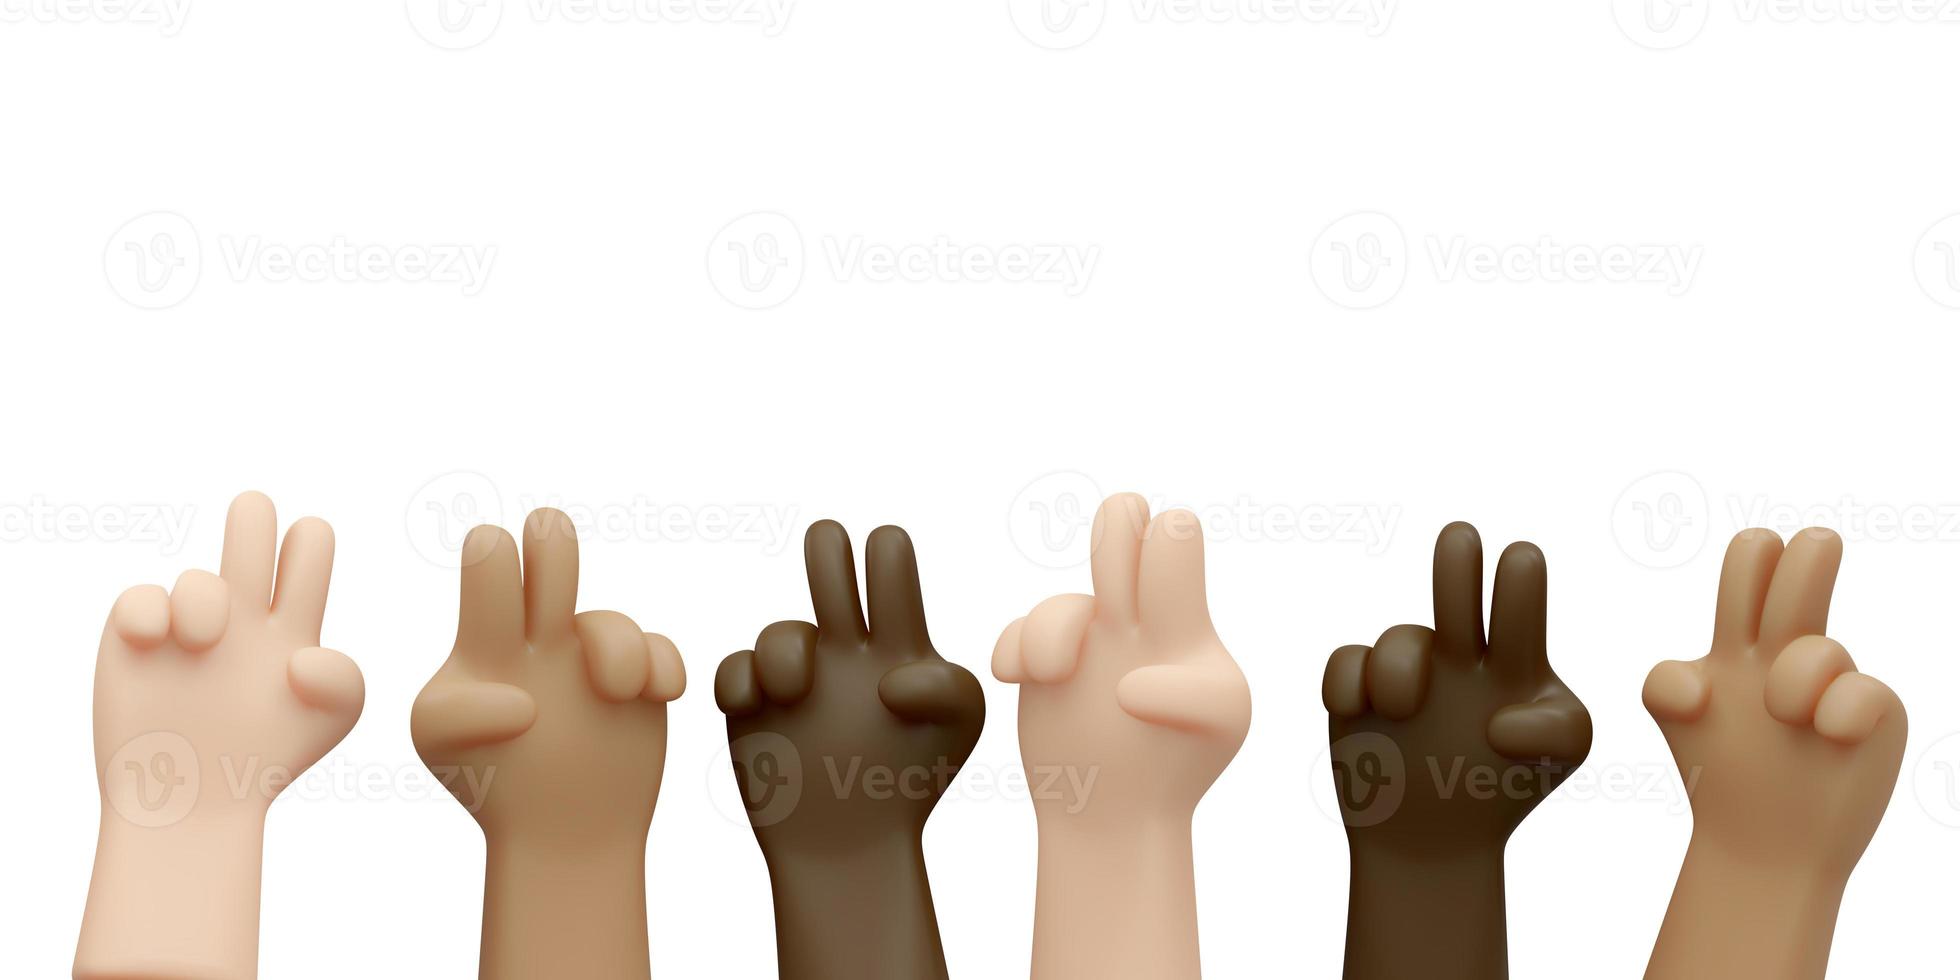 3D Rendering of hands in many color skin gesturing peace sign isolated on white background banner concept of no war stop fighting save the world. 3D Render illustration cartoon style. photo